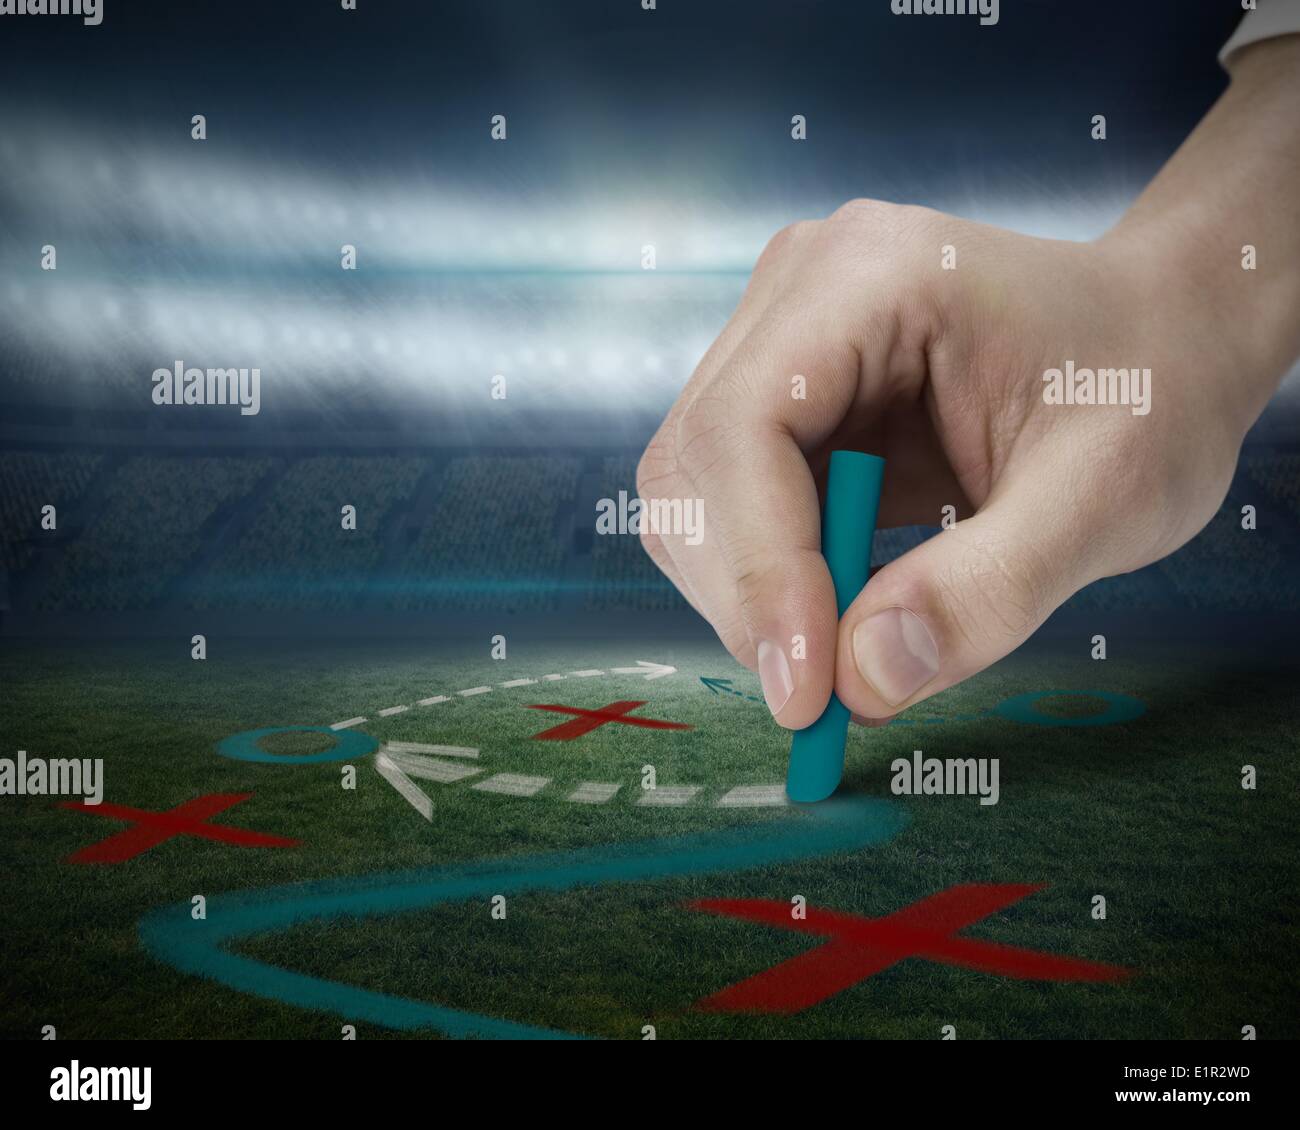 Hand drawing tactics on football pitch Stock Photo